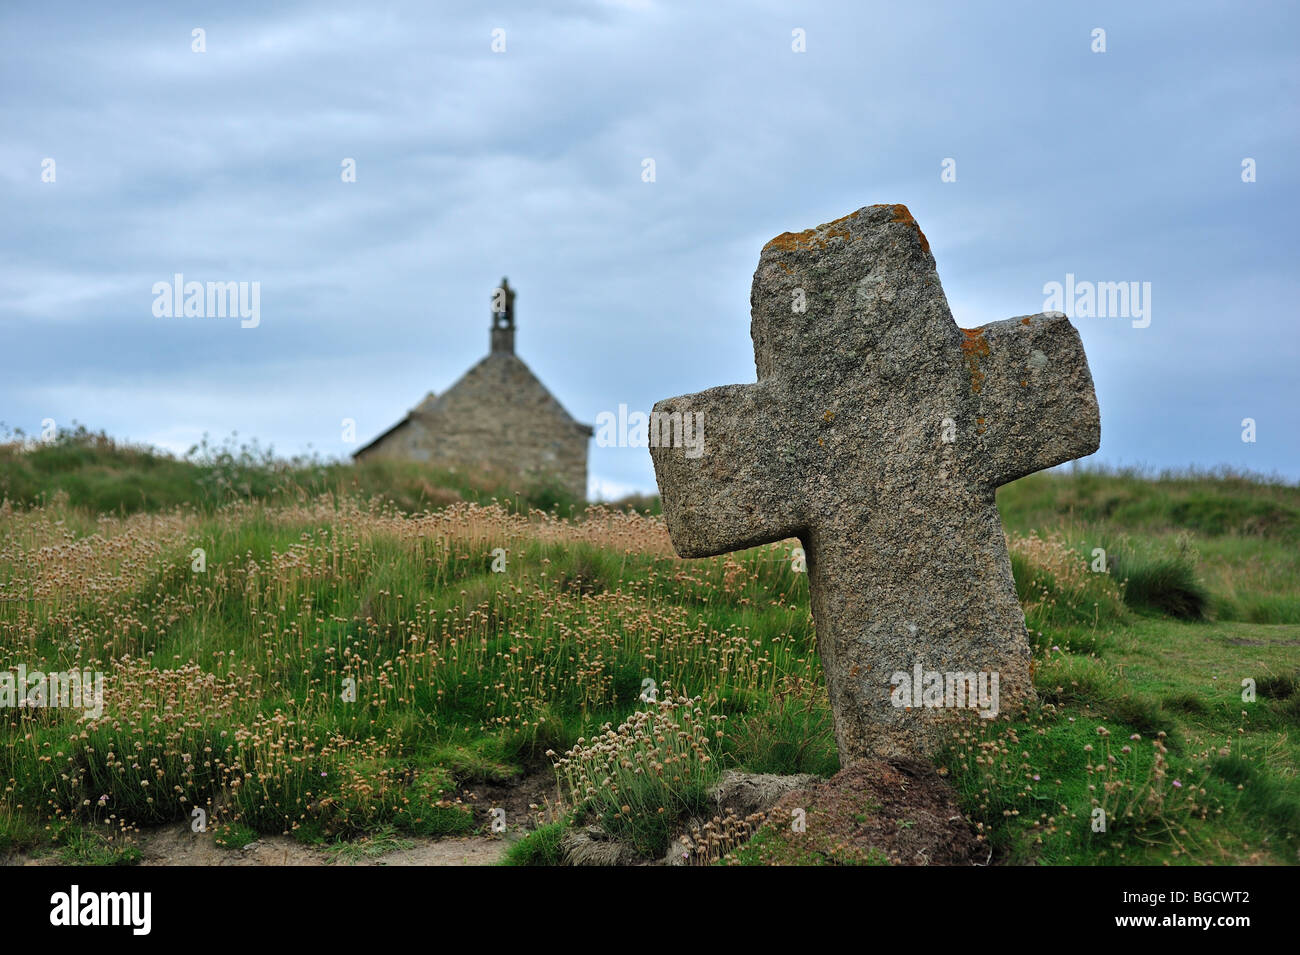 Stone cross and the Saint-Samson chapel at Landunvez, Finistère, Brittany, France Stock Photo